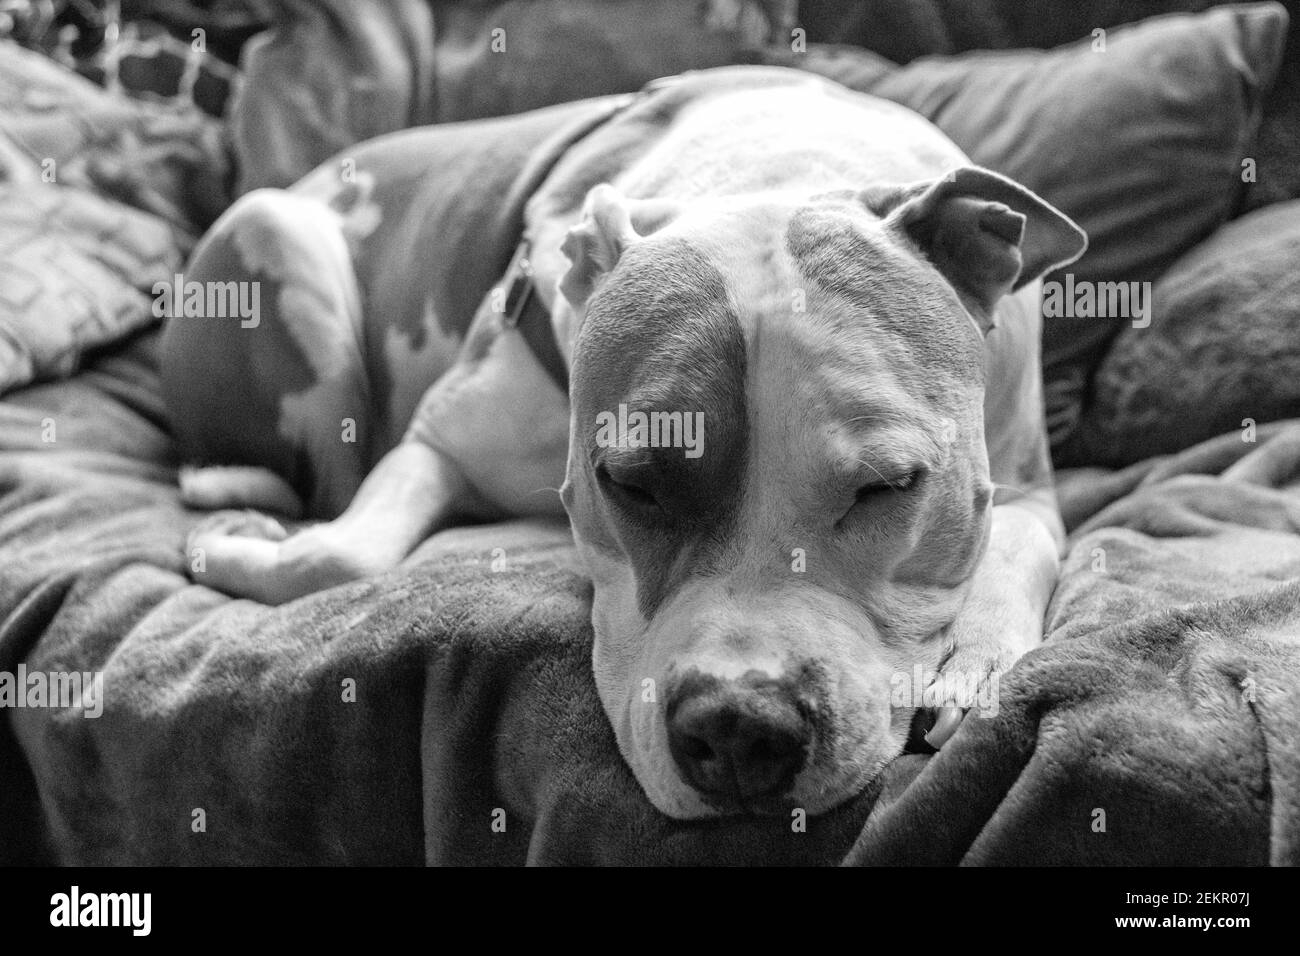 A mixed breed pitbull dog (American Staffordshire and American) (Canis lupus familiaris) dozes on a couch. Stock Photo